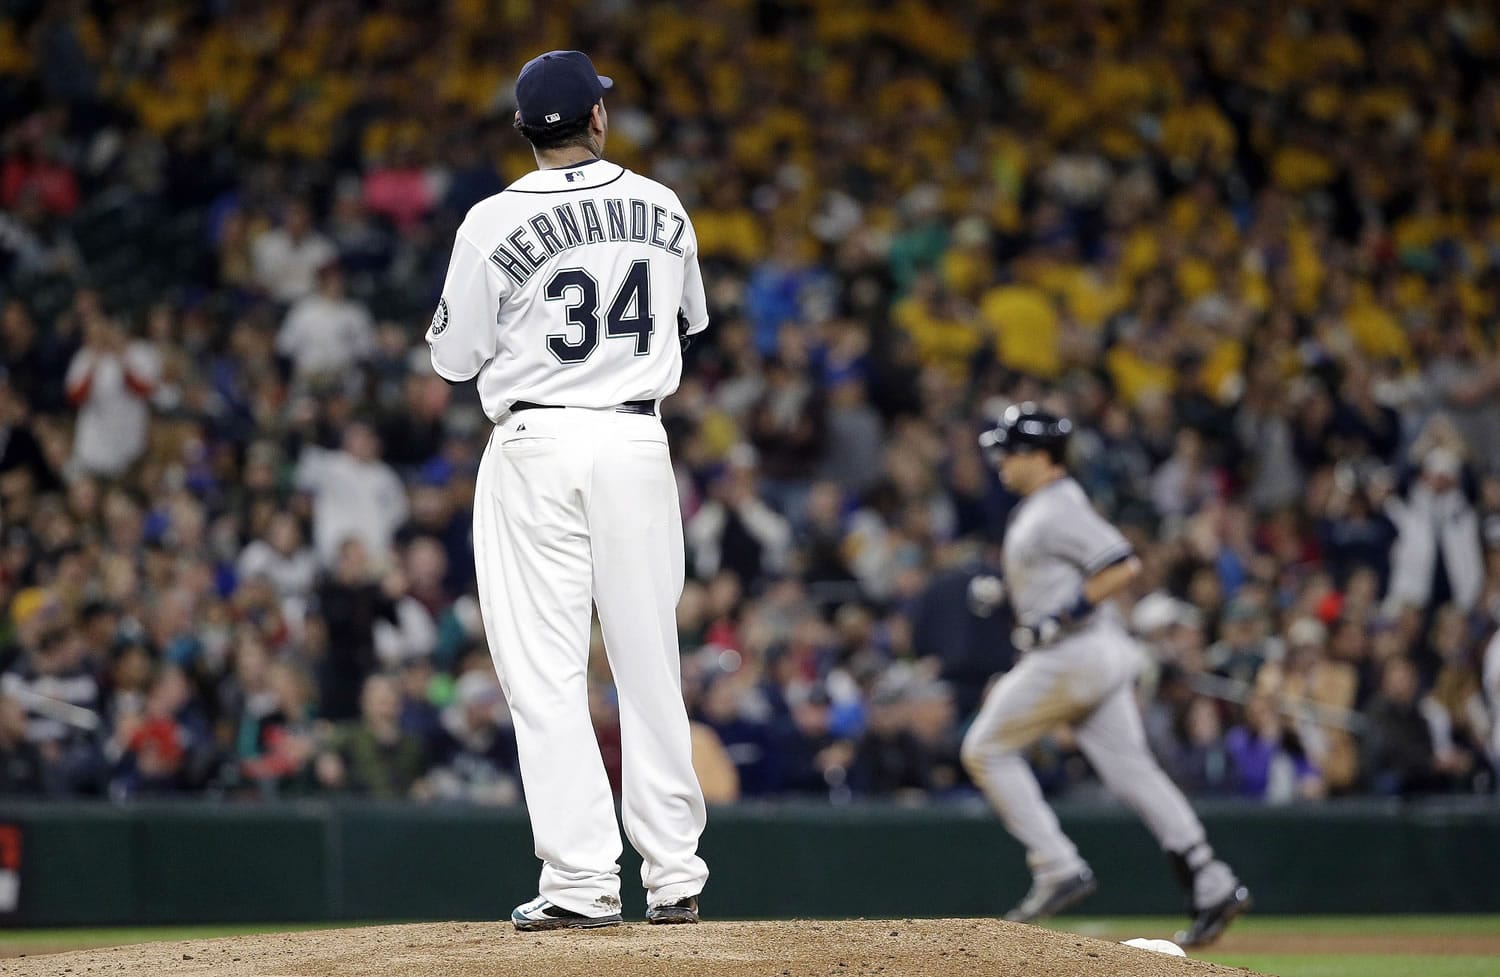 Felix Hernandez (34) watches as New York's Mark Teixeira rounds the bases on a grand slam in the fifth inning.